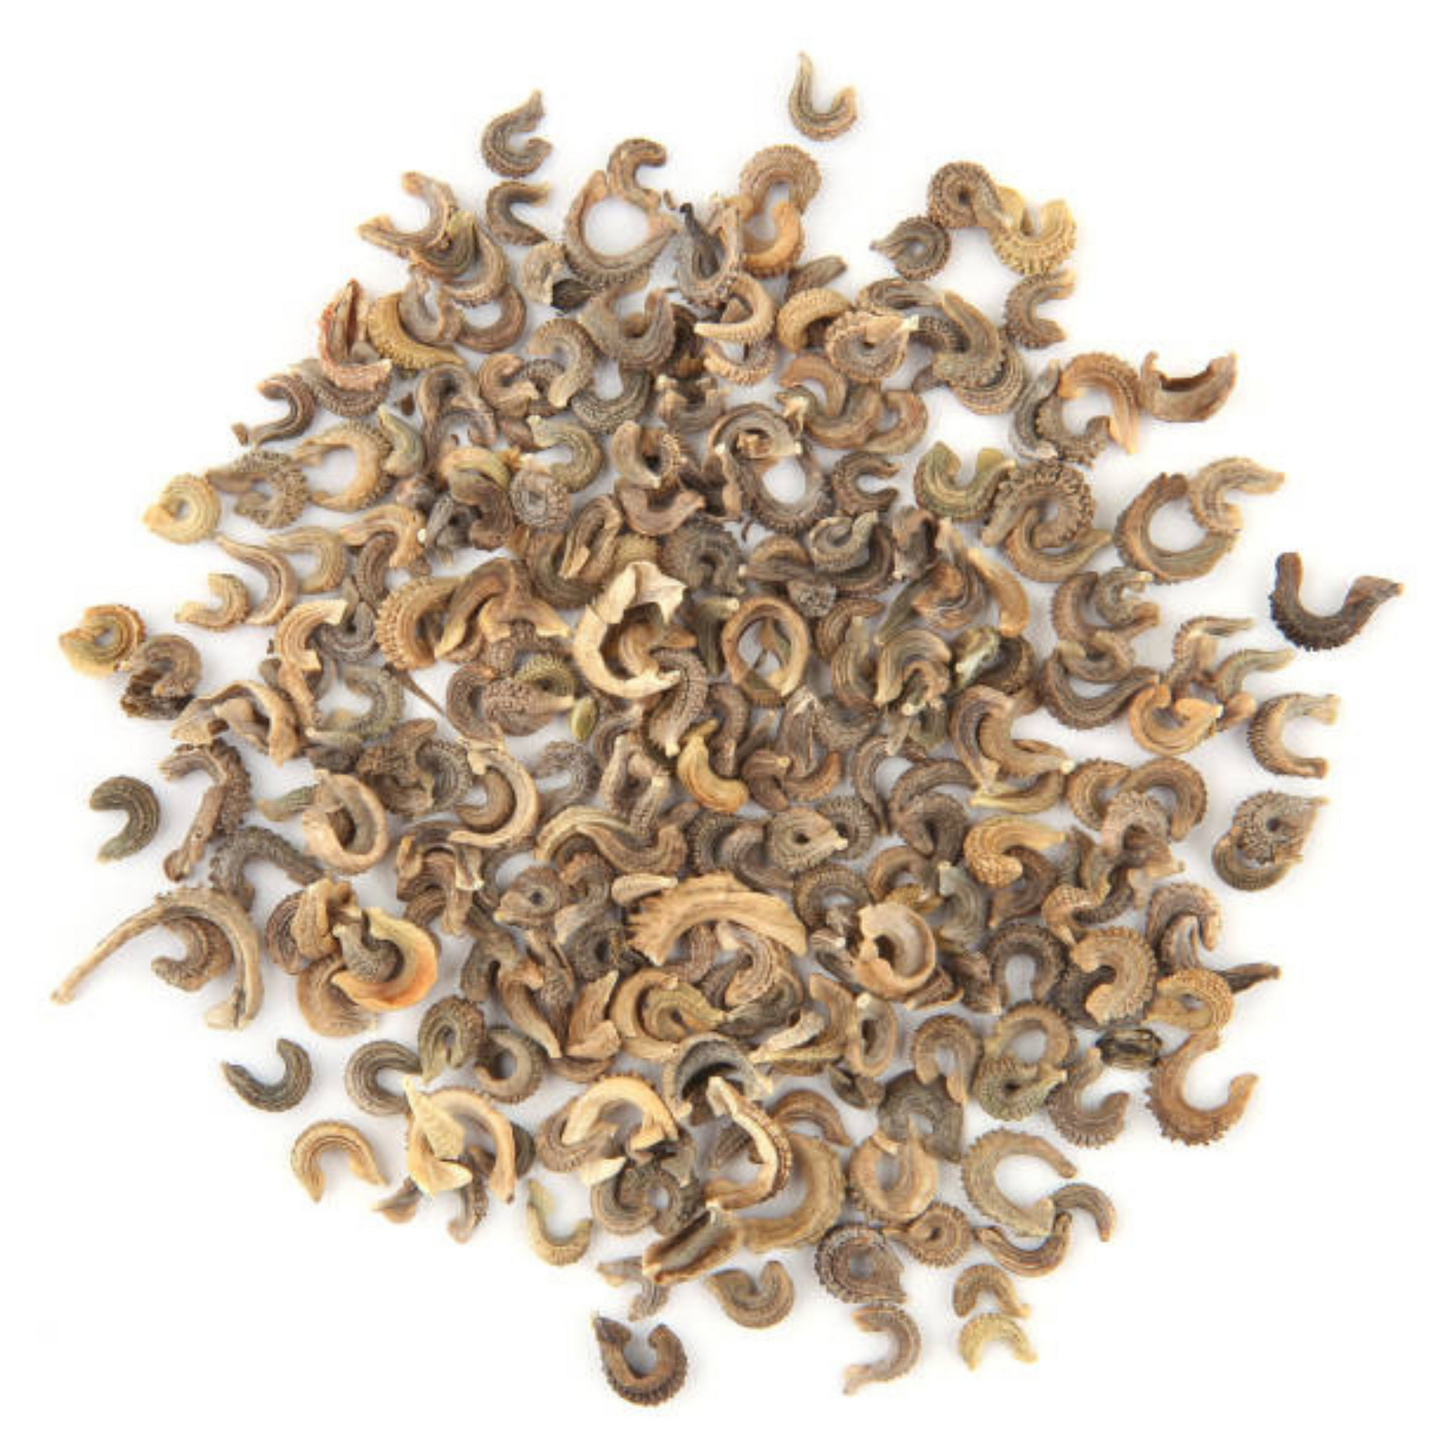 Close-up of 'Pacific Beauty' Calendula seeds scattered on a white background